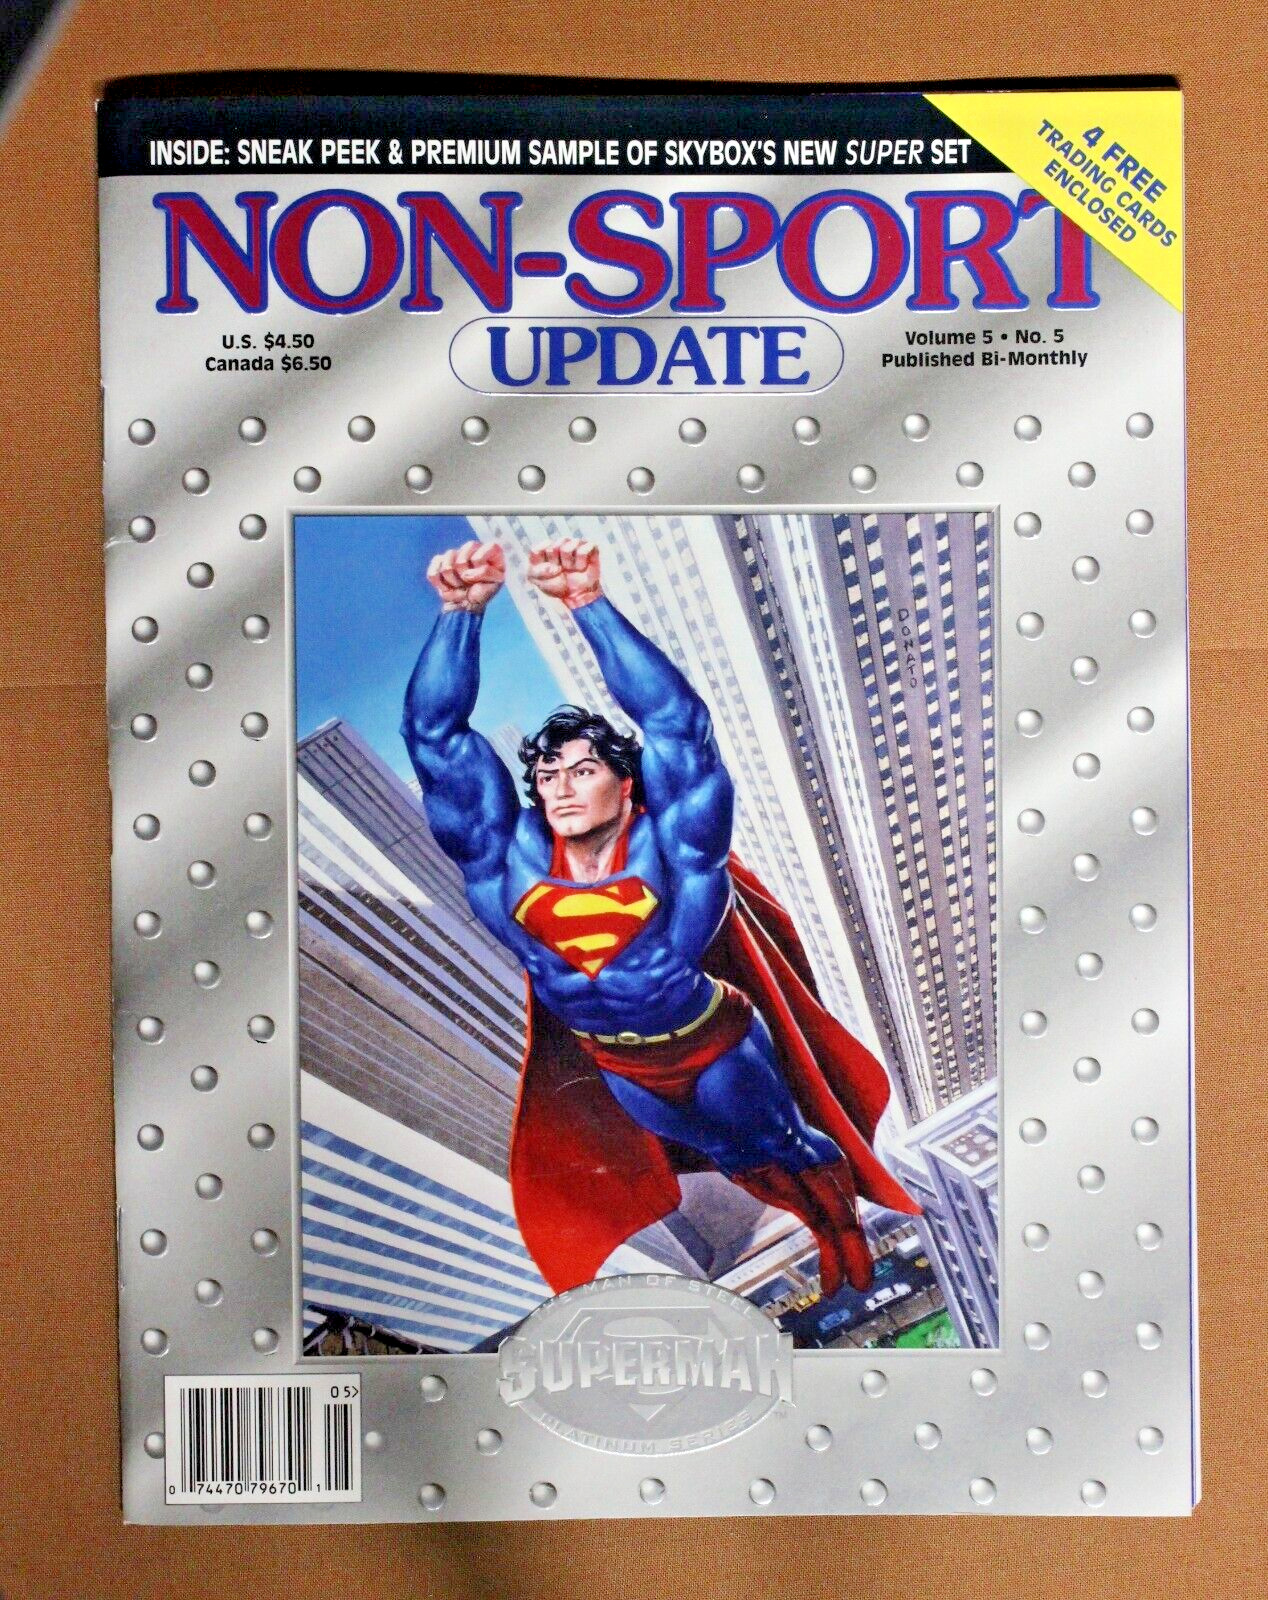 Non-Sport Update Volume 5 No.5 Superman Platinum Price Guide Cards Included